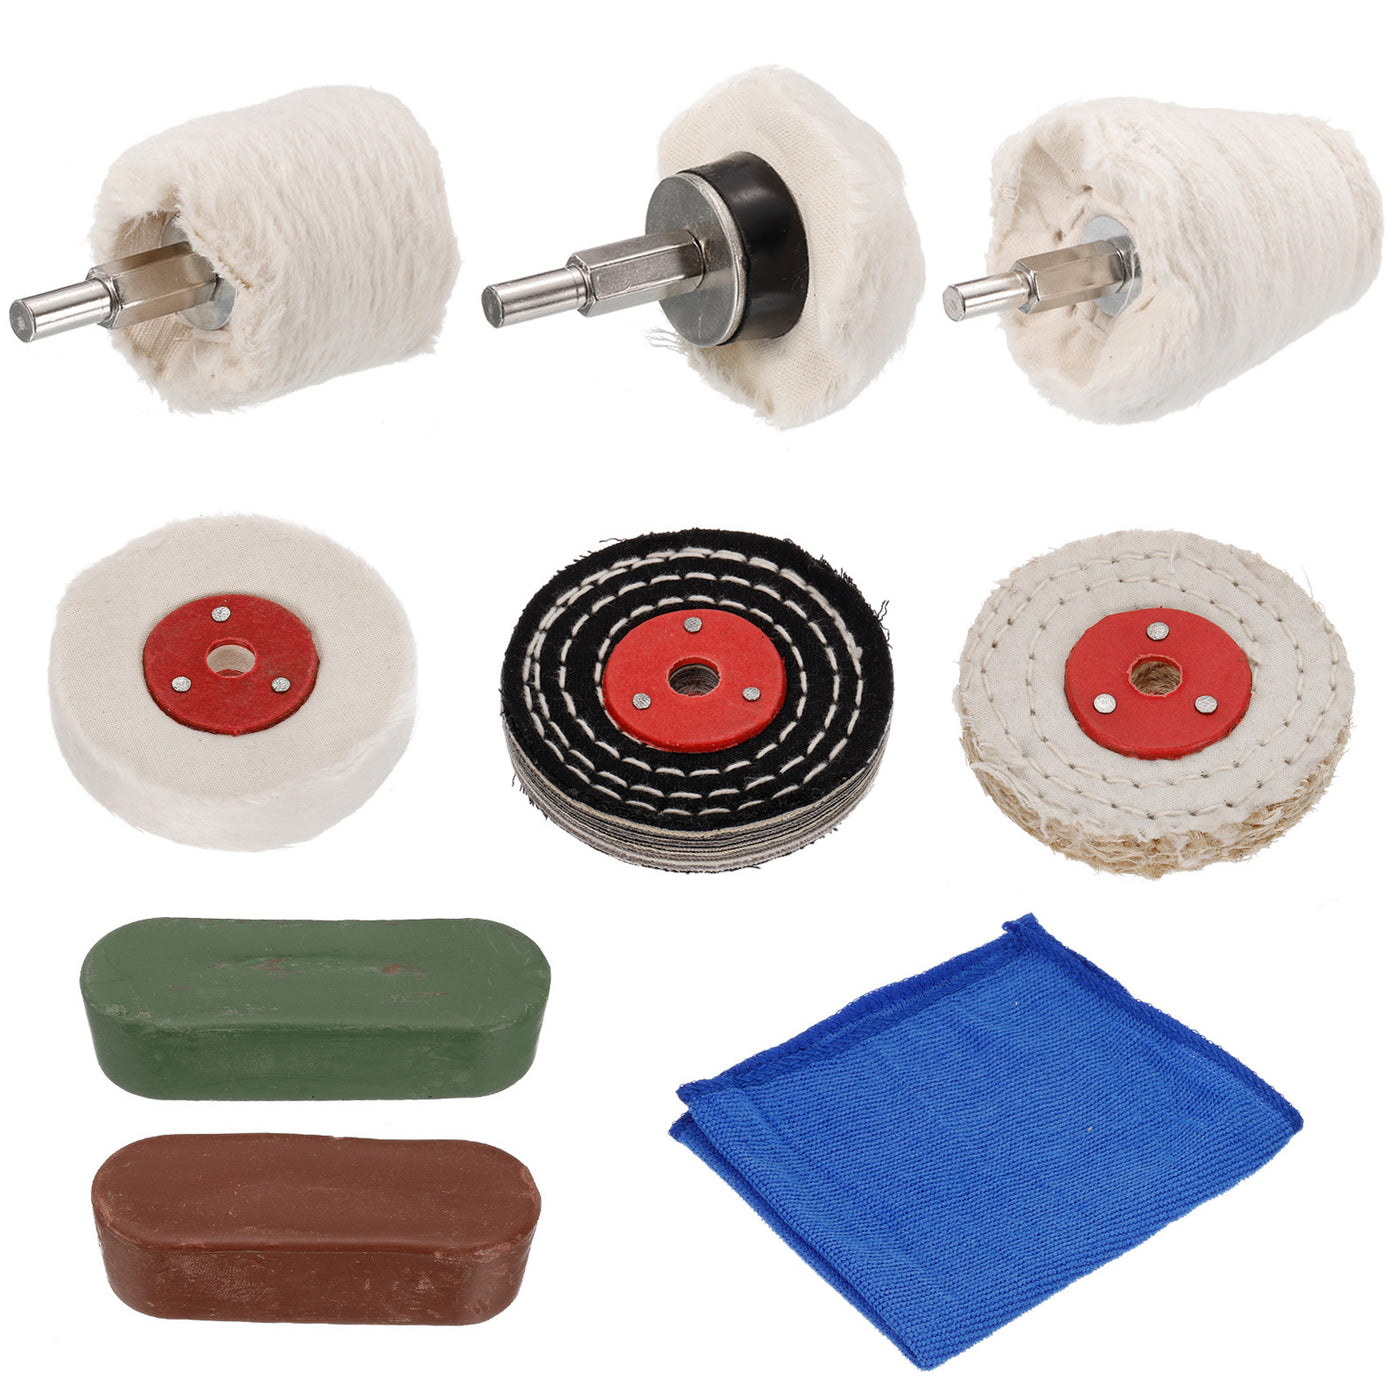 uxcell Uxcell Buffing Wheel & Polish Pad Set, Cone/Cylindrica/Mushroom Shape Cotton Polished Wheels with Microfiber Towel, Polishing Compounds